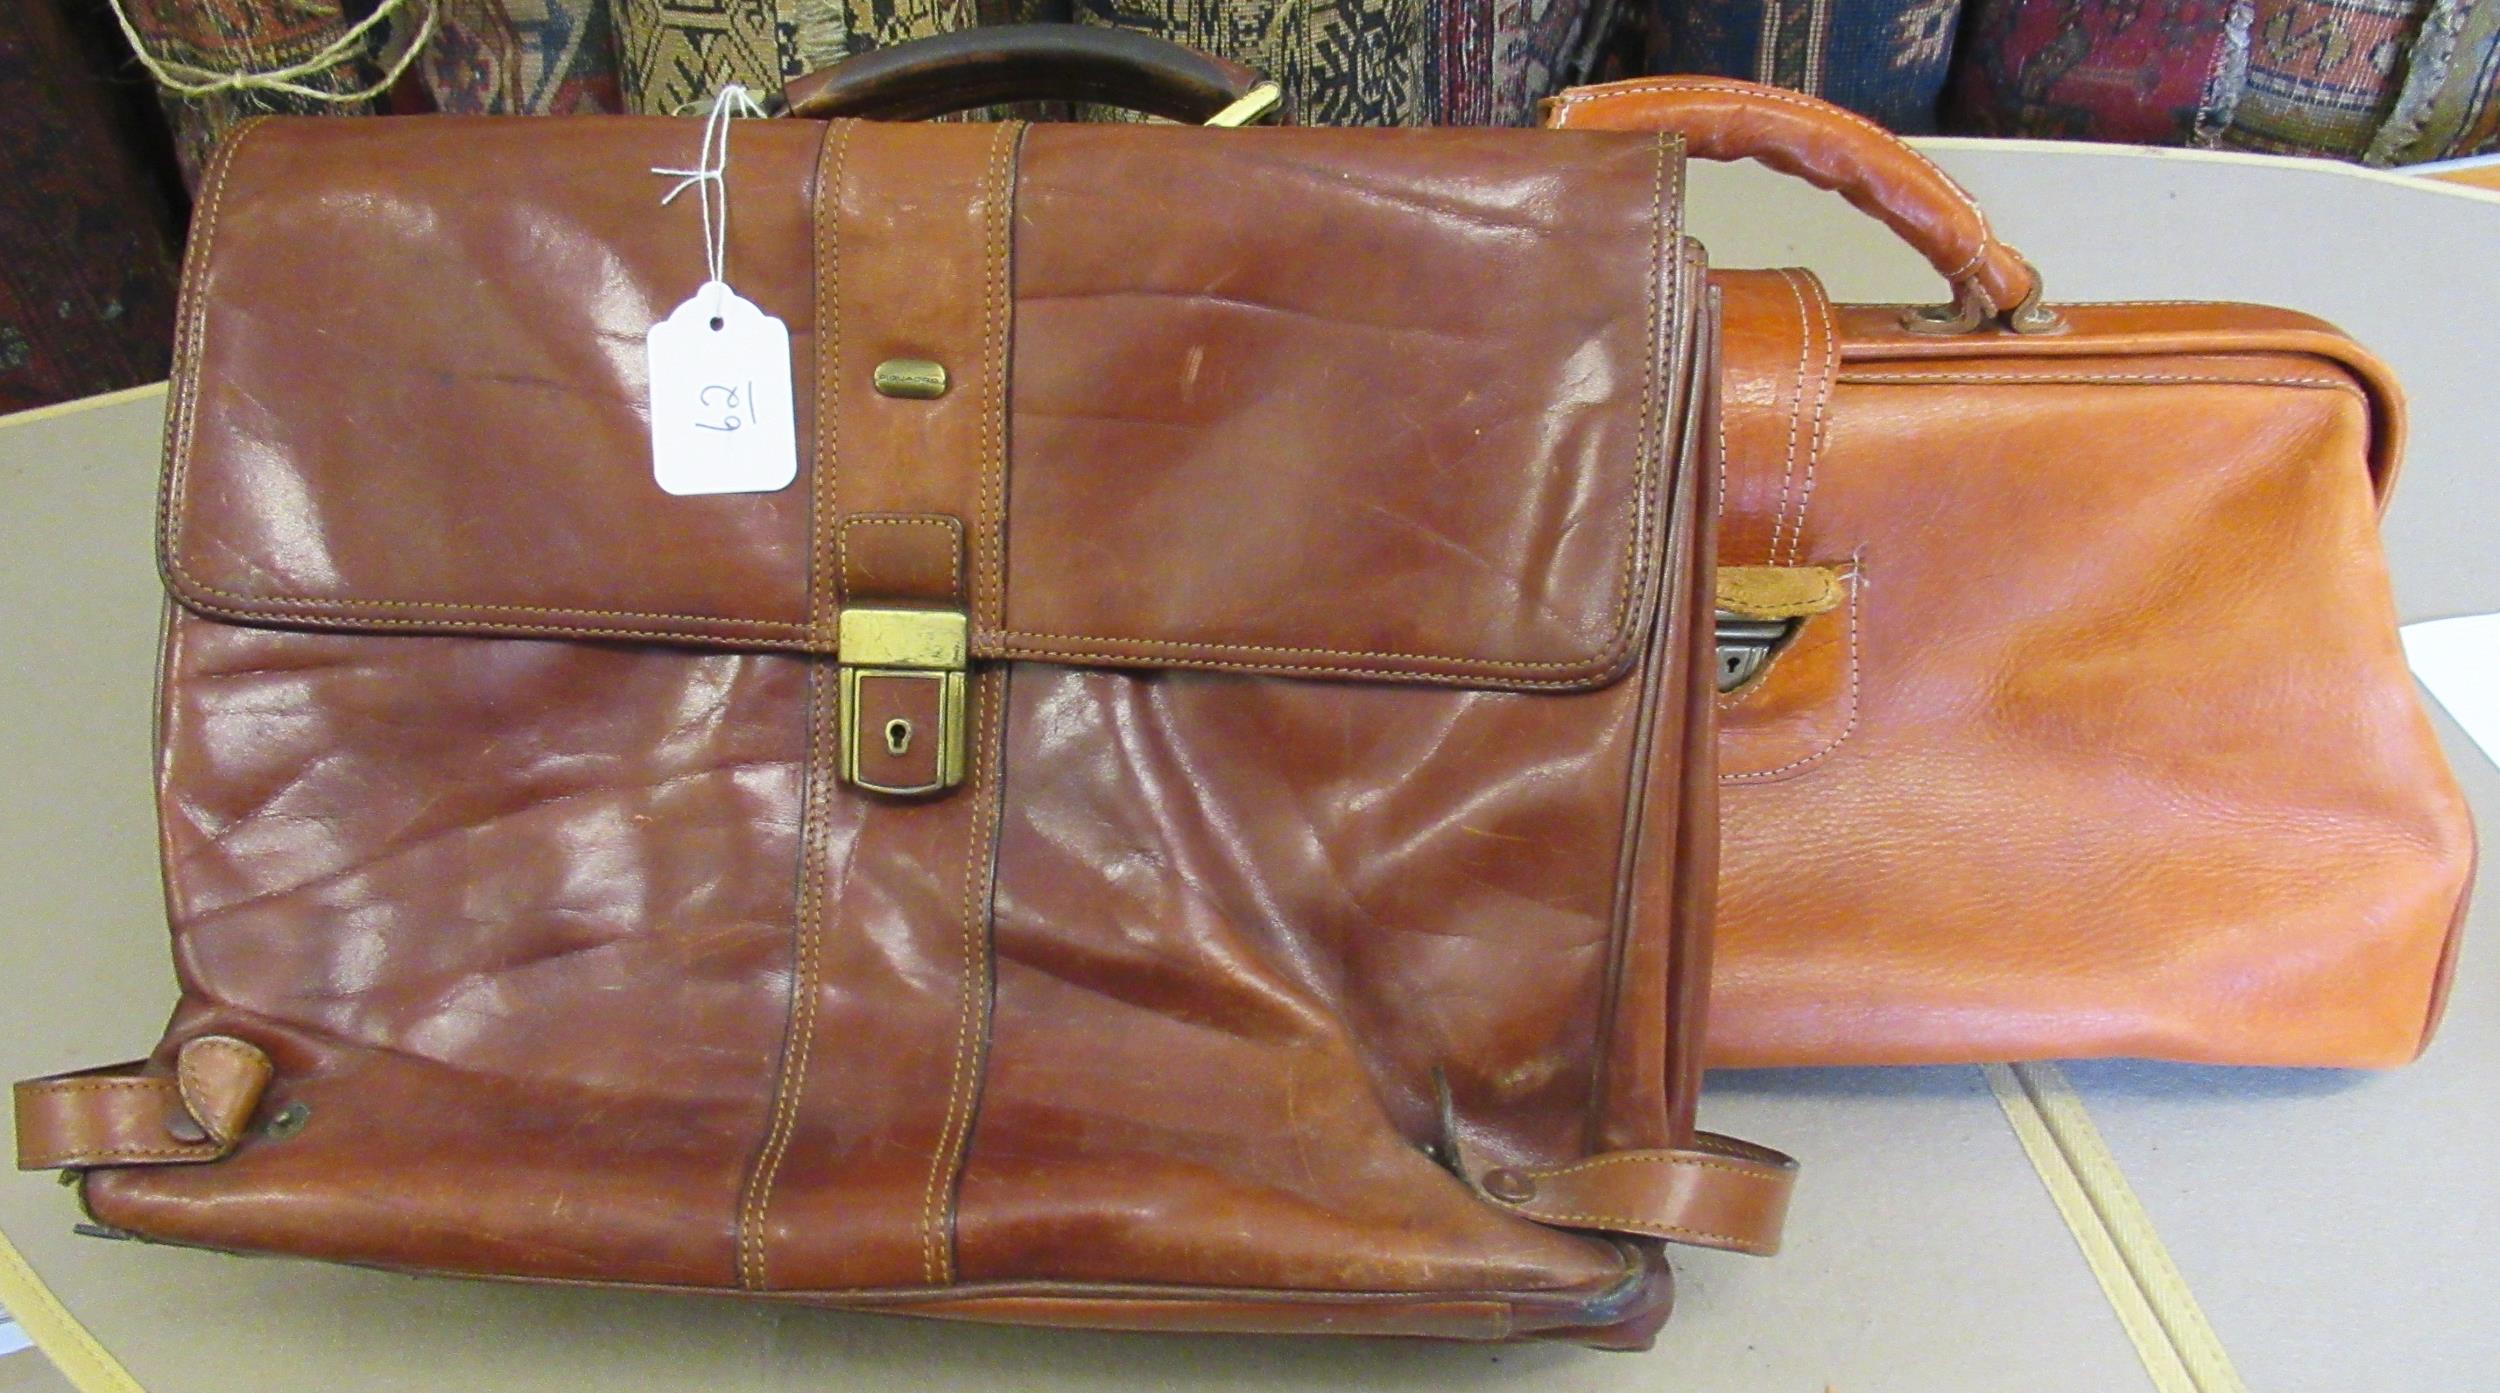 Tan leather attaché case by Piquadro, together with another leather briefcase Condition as shown